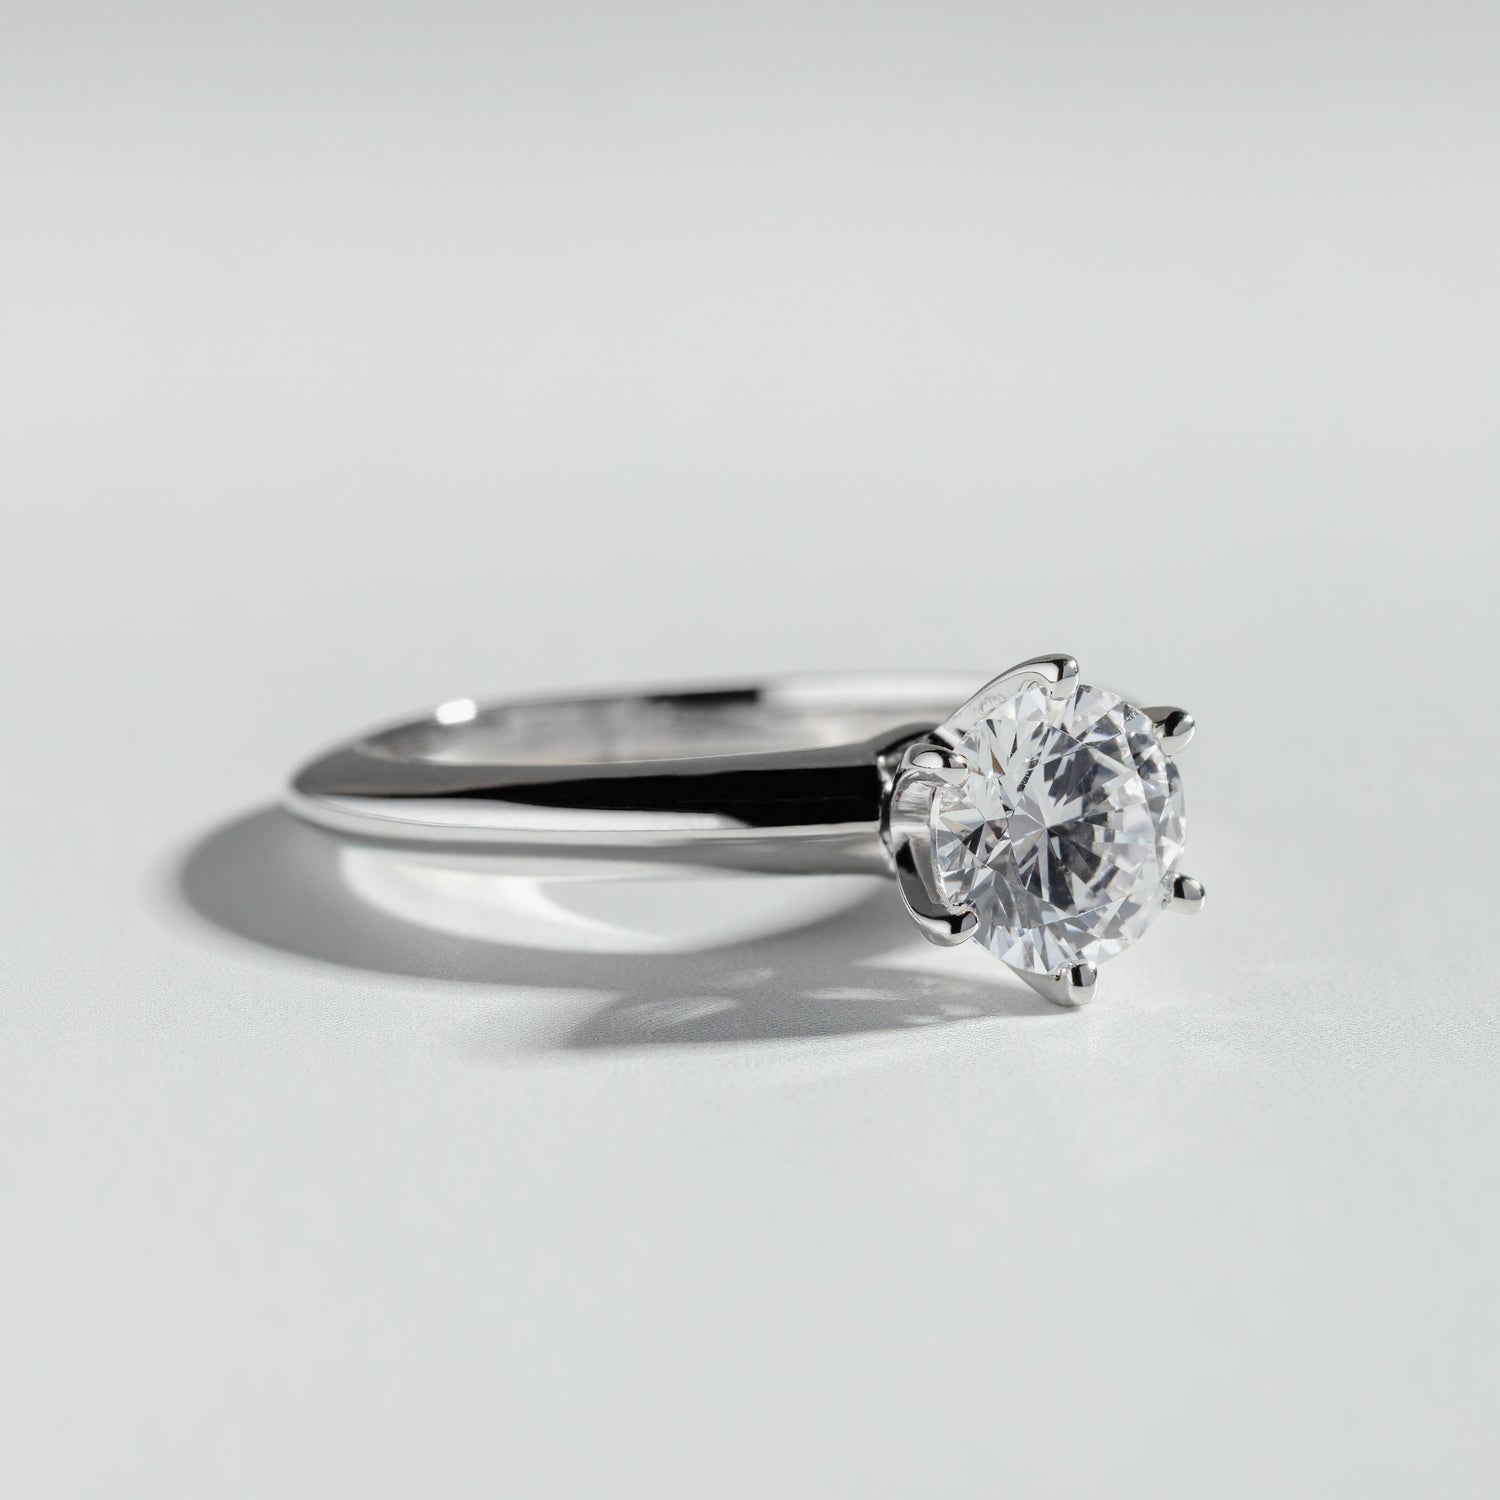 The Round Cut 6 Prongs Diamond Solitaire Ring